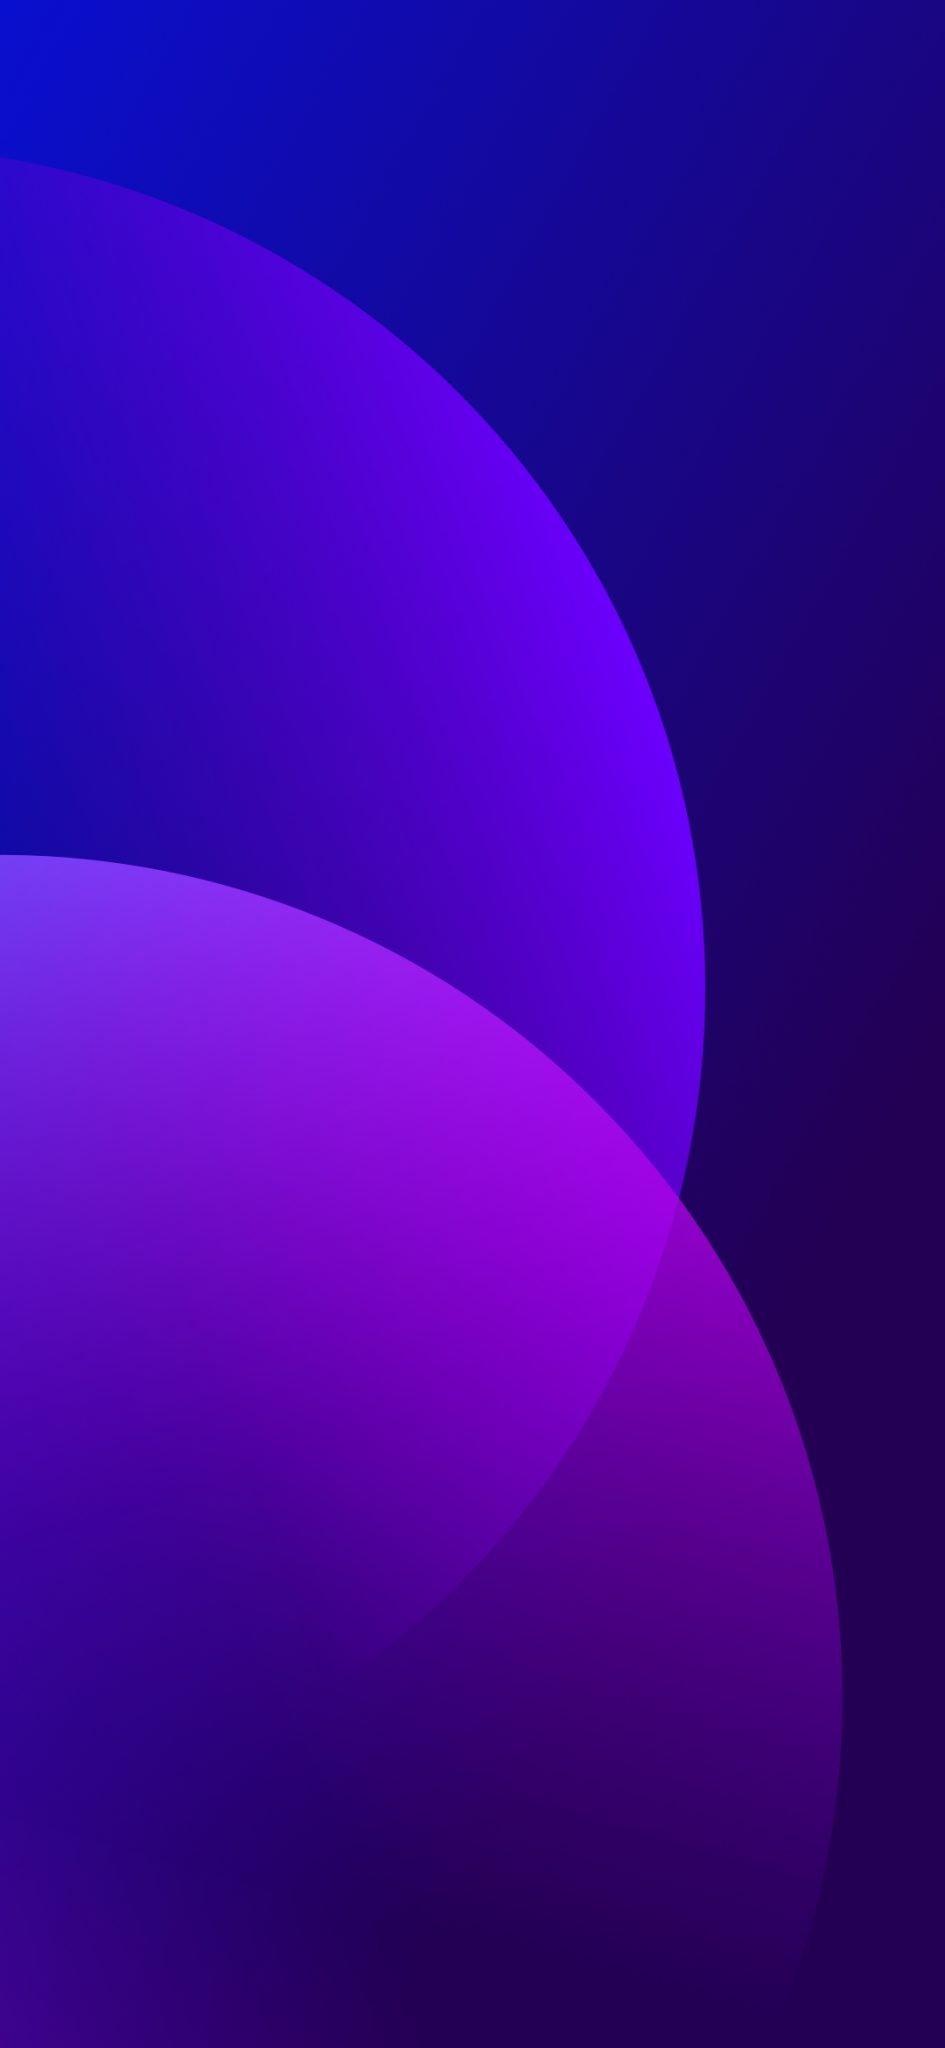 100 OPPO F9 Pro Wallpaper  Android  iPhone HD Wallpaper Background  Download png  jpg 2023